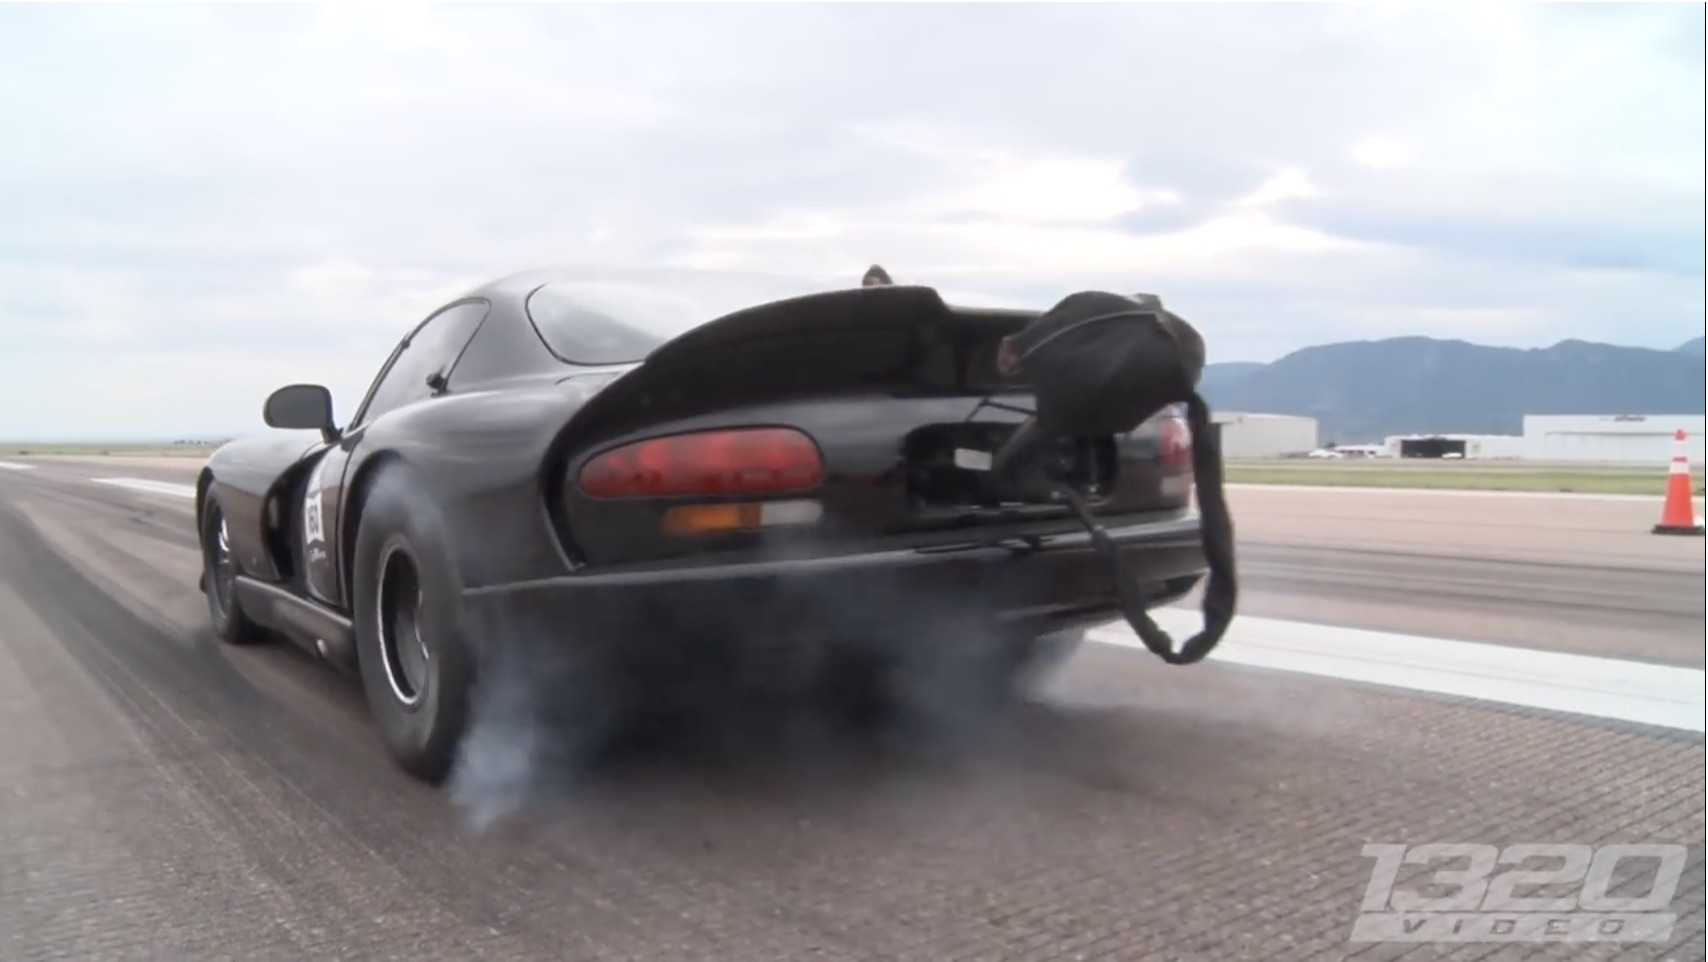 Over 240 MPH In A Half Mile – Sal Patel’s Viper Is A Freaking Beast!